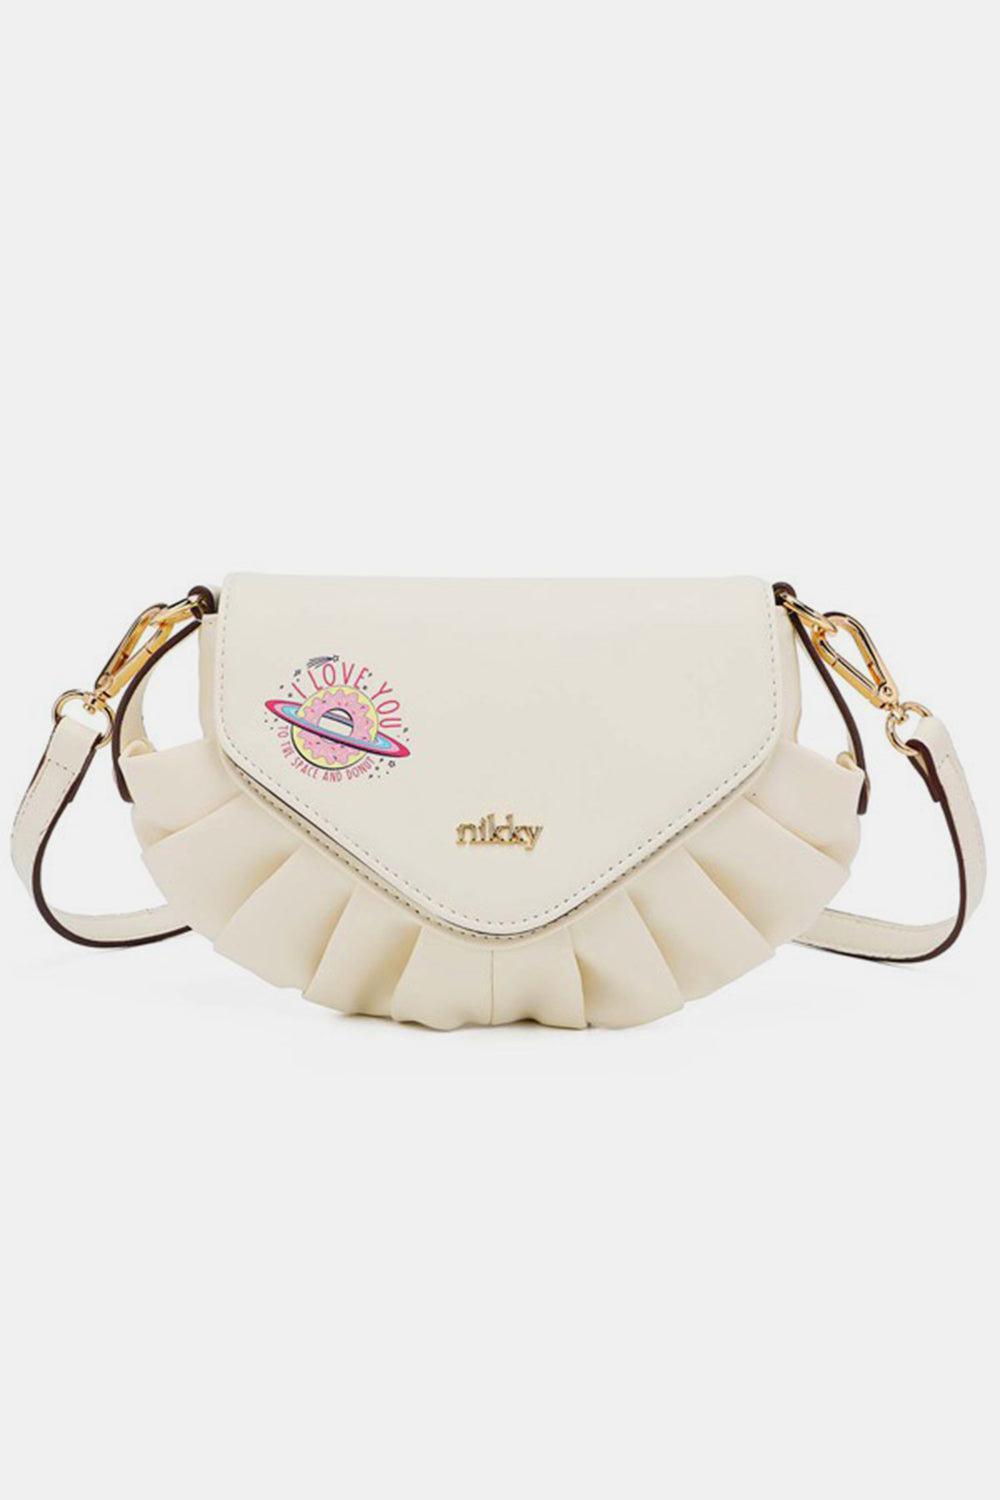 a white purse with a ruffled strap